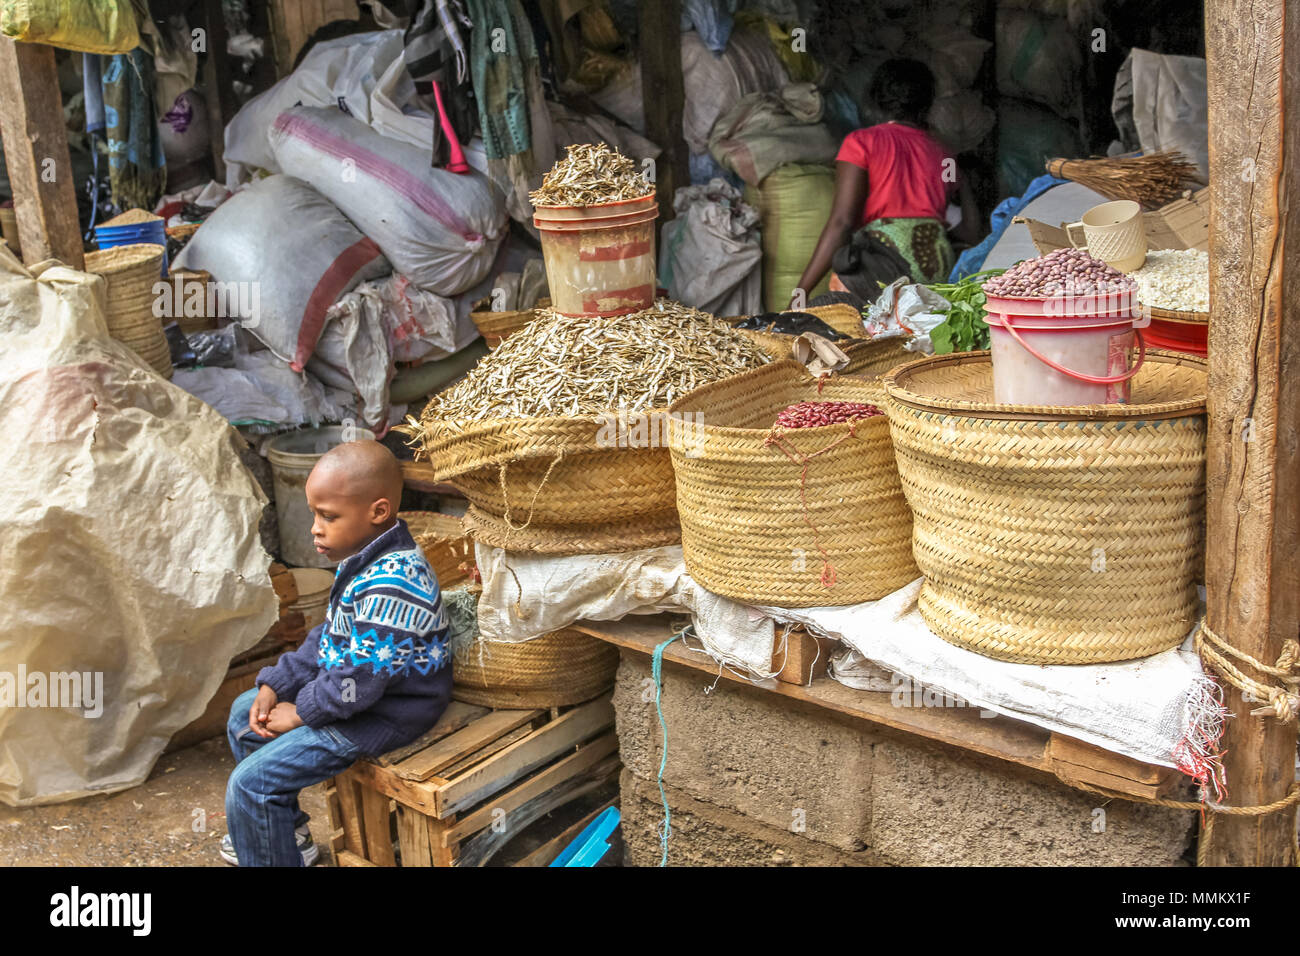 Arusha, Tanzania - January 2, 2013: Lone black child in a market of the town Stock Photo